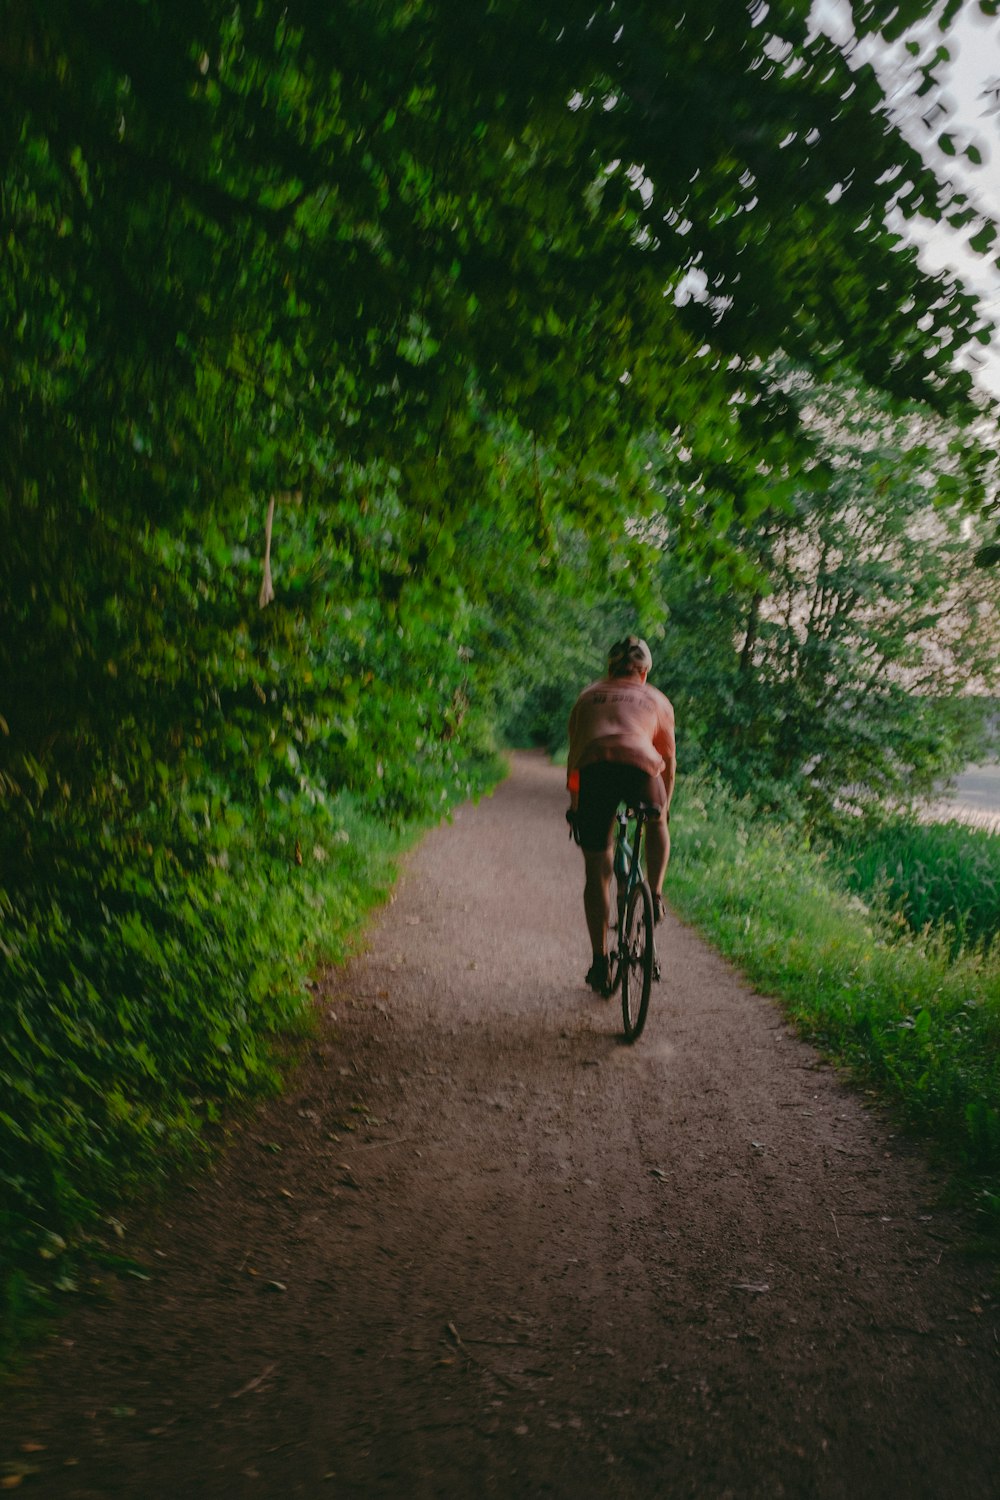 a person riding a bicycle on a dirt path surrounded by trees